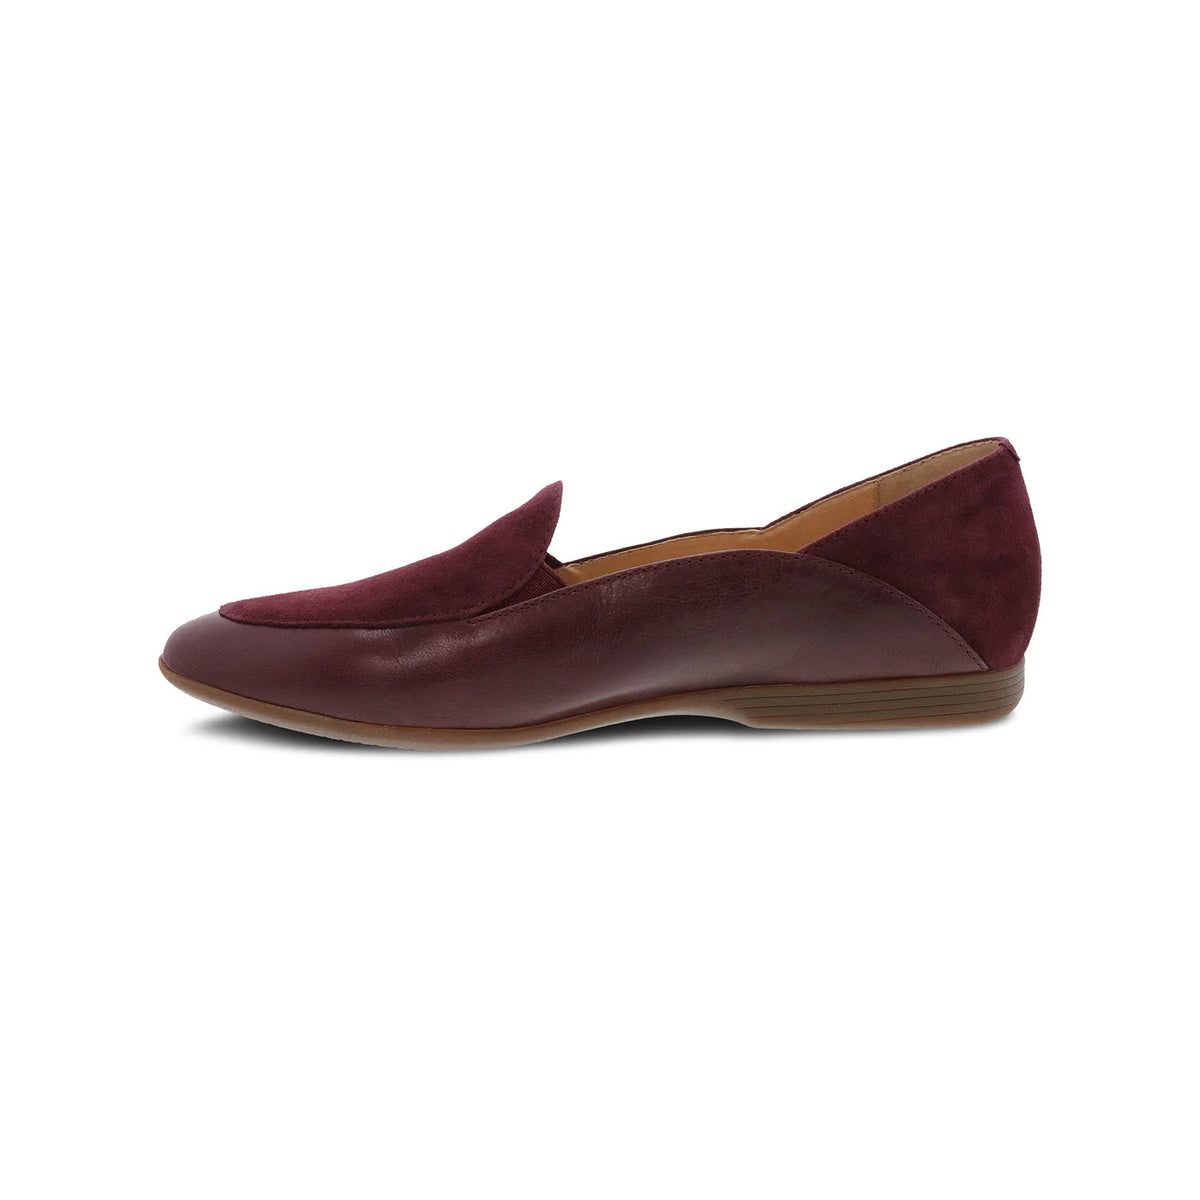 Side view of a maroon women&#39;s flat shoe featuring Dansko lace loafer design with a suede finish on a white background.